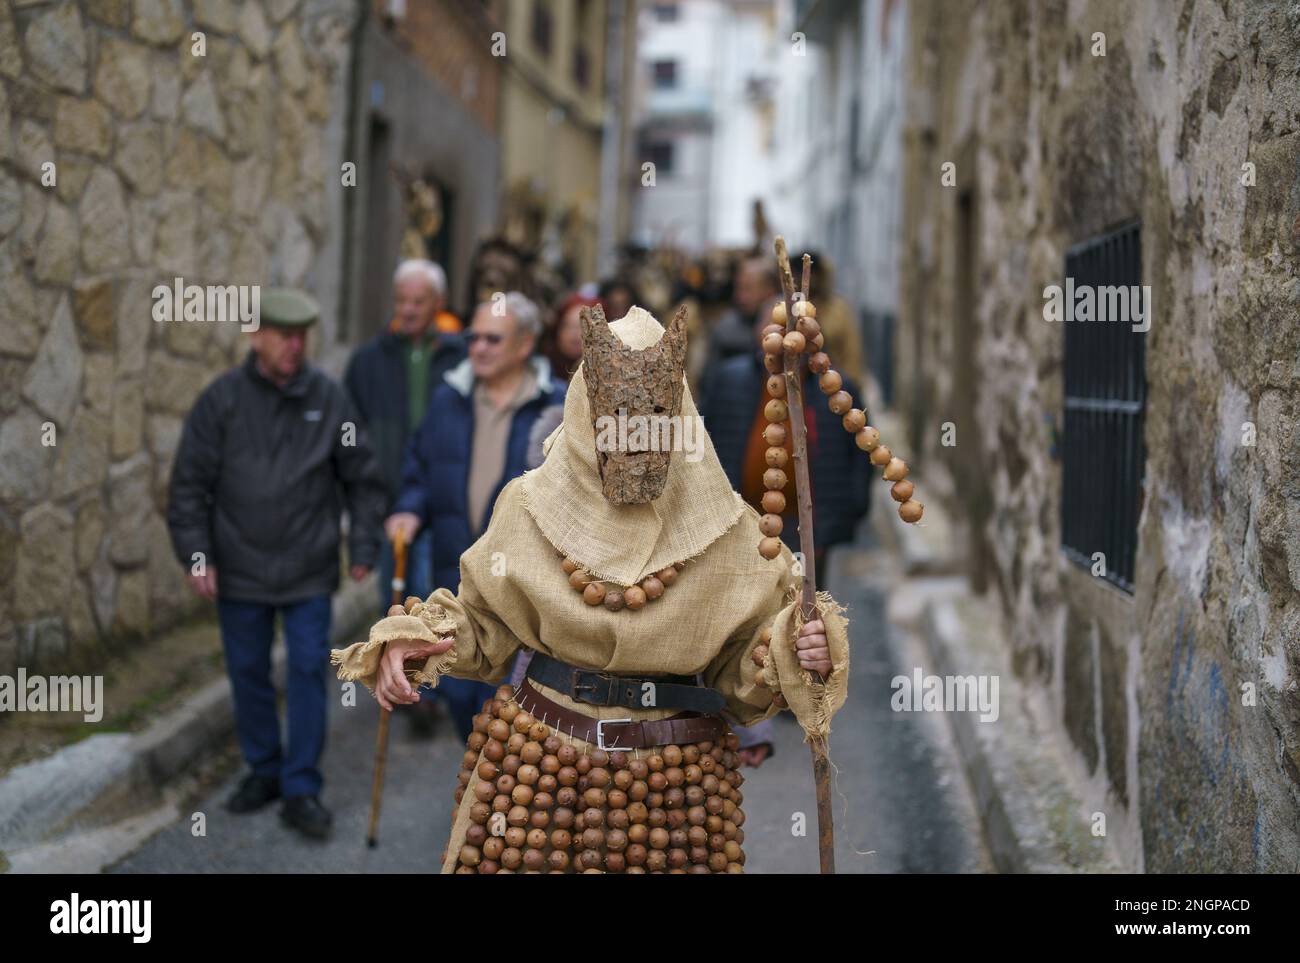 Navalacruz, Spain. 18th Feb, 2023. A carnival reveller dressed as a traditional 'Harramacho' wearing tree bark and other agricultural decor takes part in a carnival festival in the village of Navalacruz, Spain, on Saturday, February 18, 2023. The 'Herramacho' figures, whose costumes are made from natural materials collected from the surrounding environment, were believed to protect family and cattle in pre-Roman rituals. Photo by Paul Hanna/UPI Credit: UPI/Alamy Live News Stock Photo